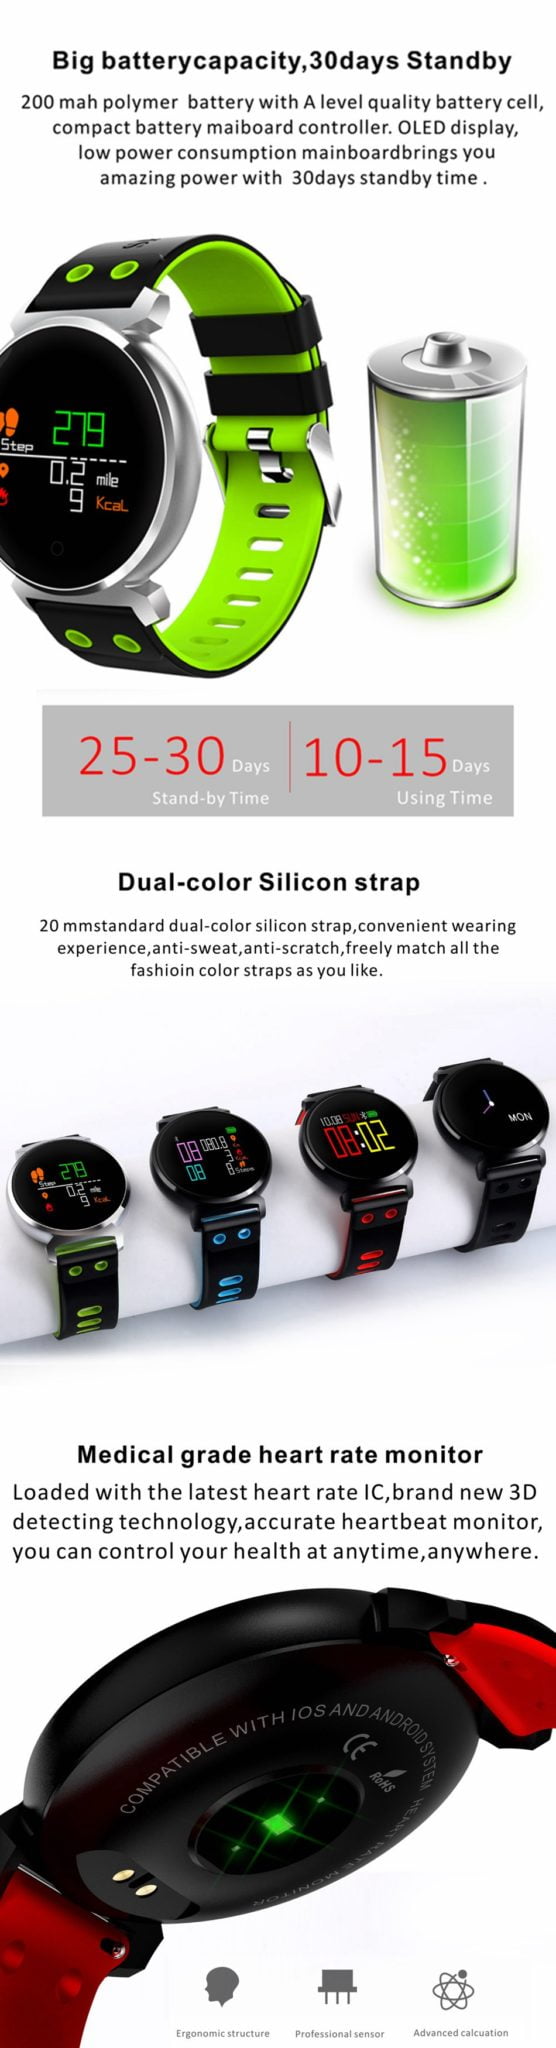 K2 OLED HD Color Display Swimming Long Stand-by Time Blood Pressure Blood Oxygen Monitor Smart Bluetooth Watch